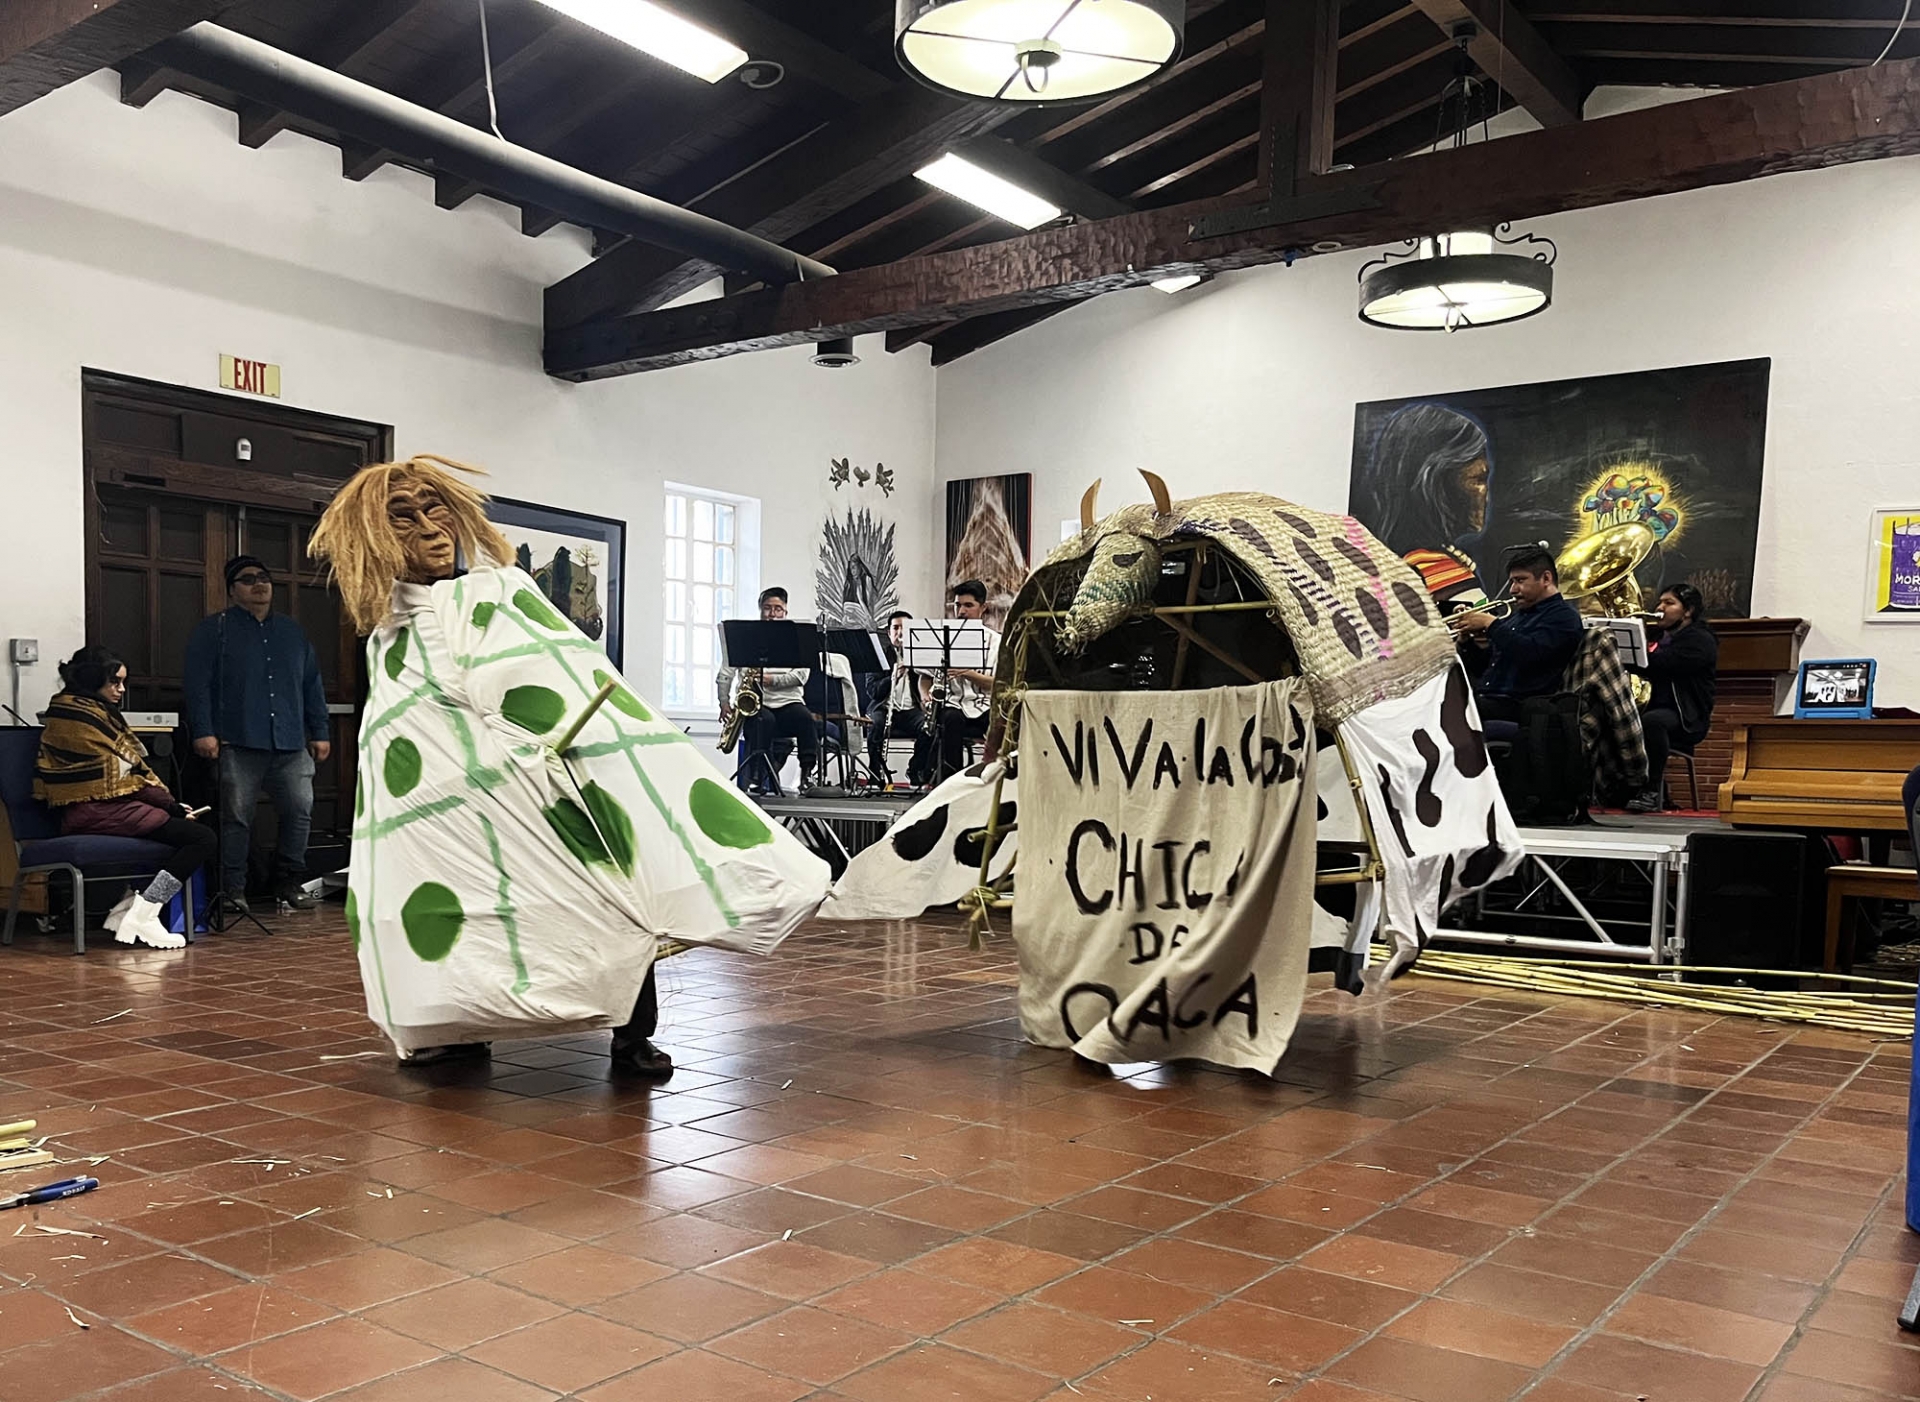 The turtle and the bull, constructed during the weekend celebration at the Garcia Center for the Arts, will be incorporated into the CSUSB Anthropology Museum’s Afróntalo exhibit, opening in September.